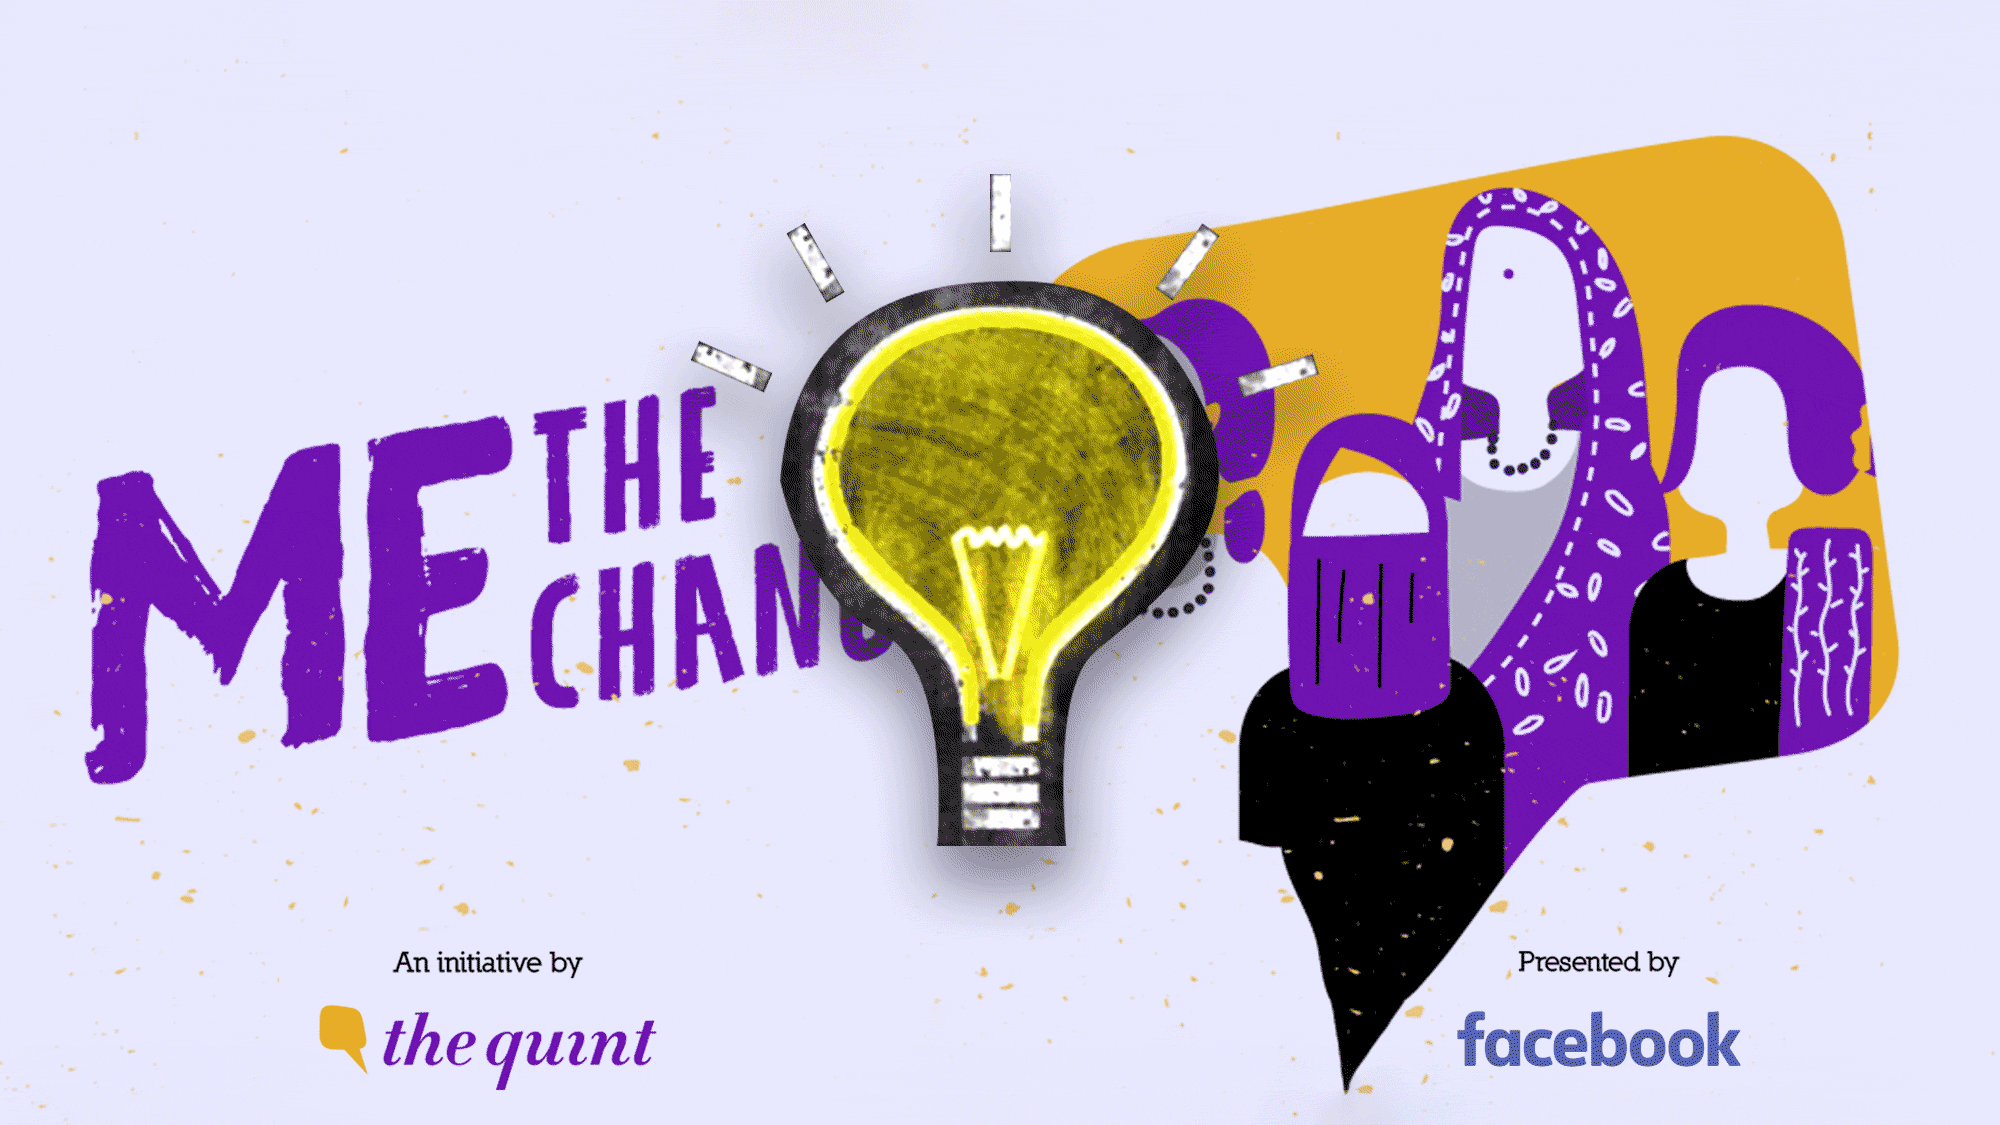 How much do you know about women in India? Take The Quint’s ‘Me,&nbsp; The Change’ quiz and find out!